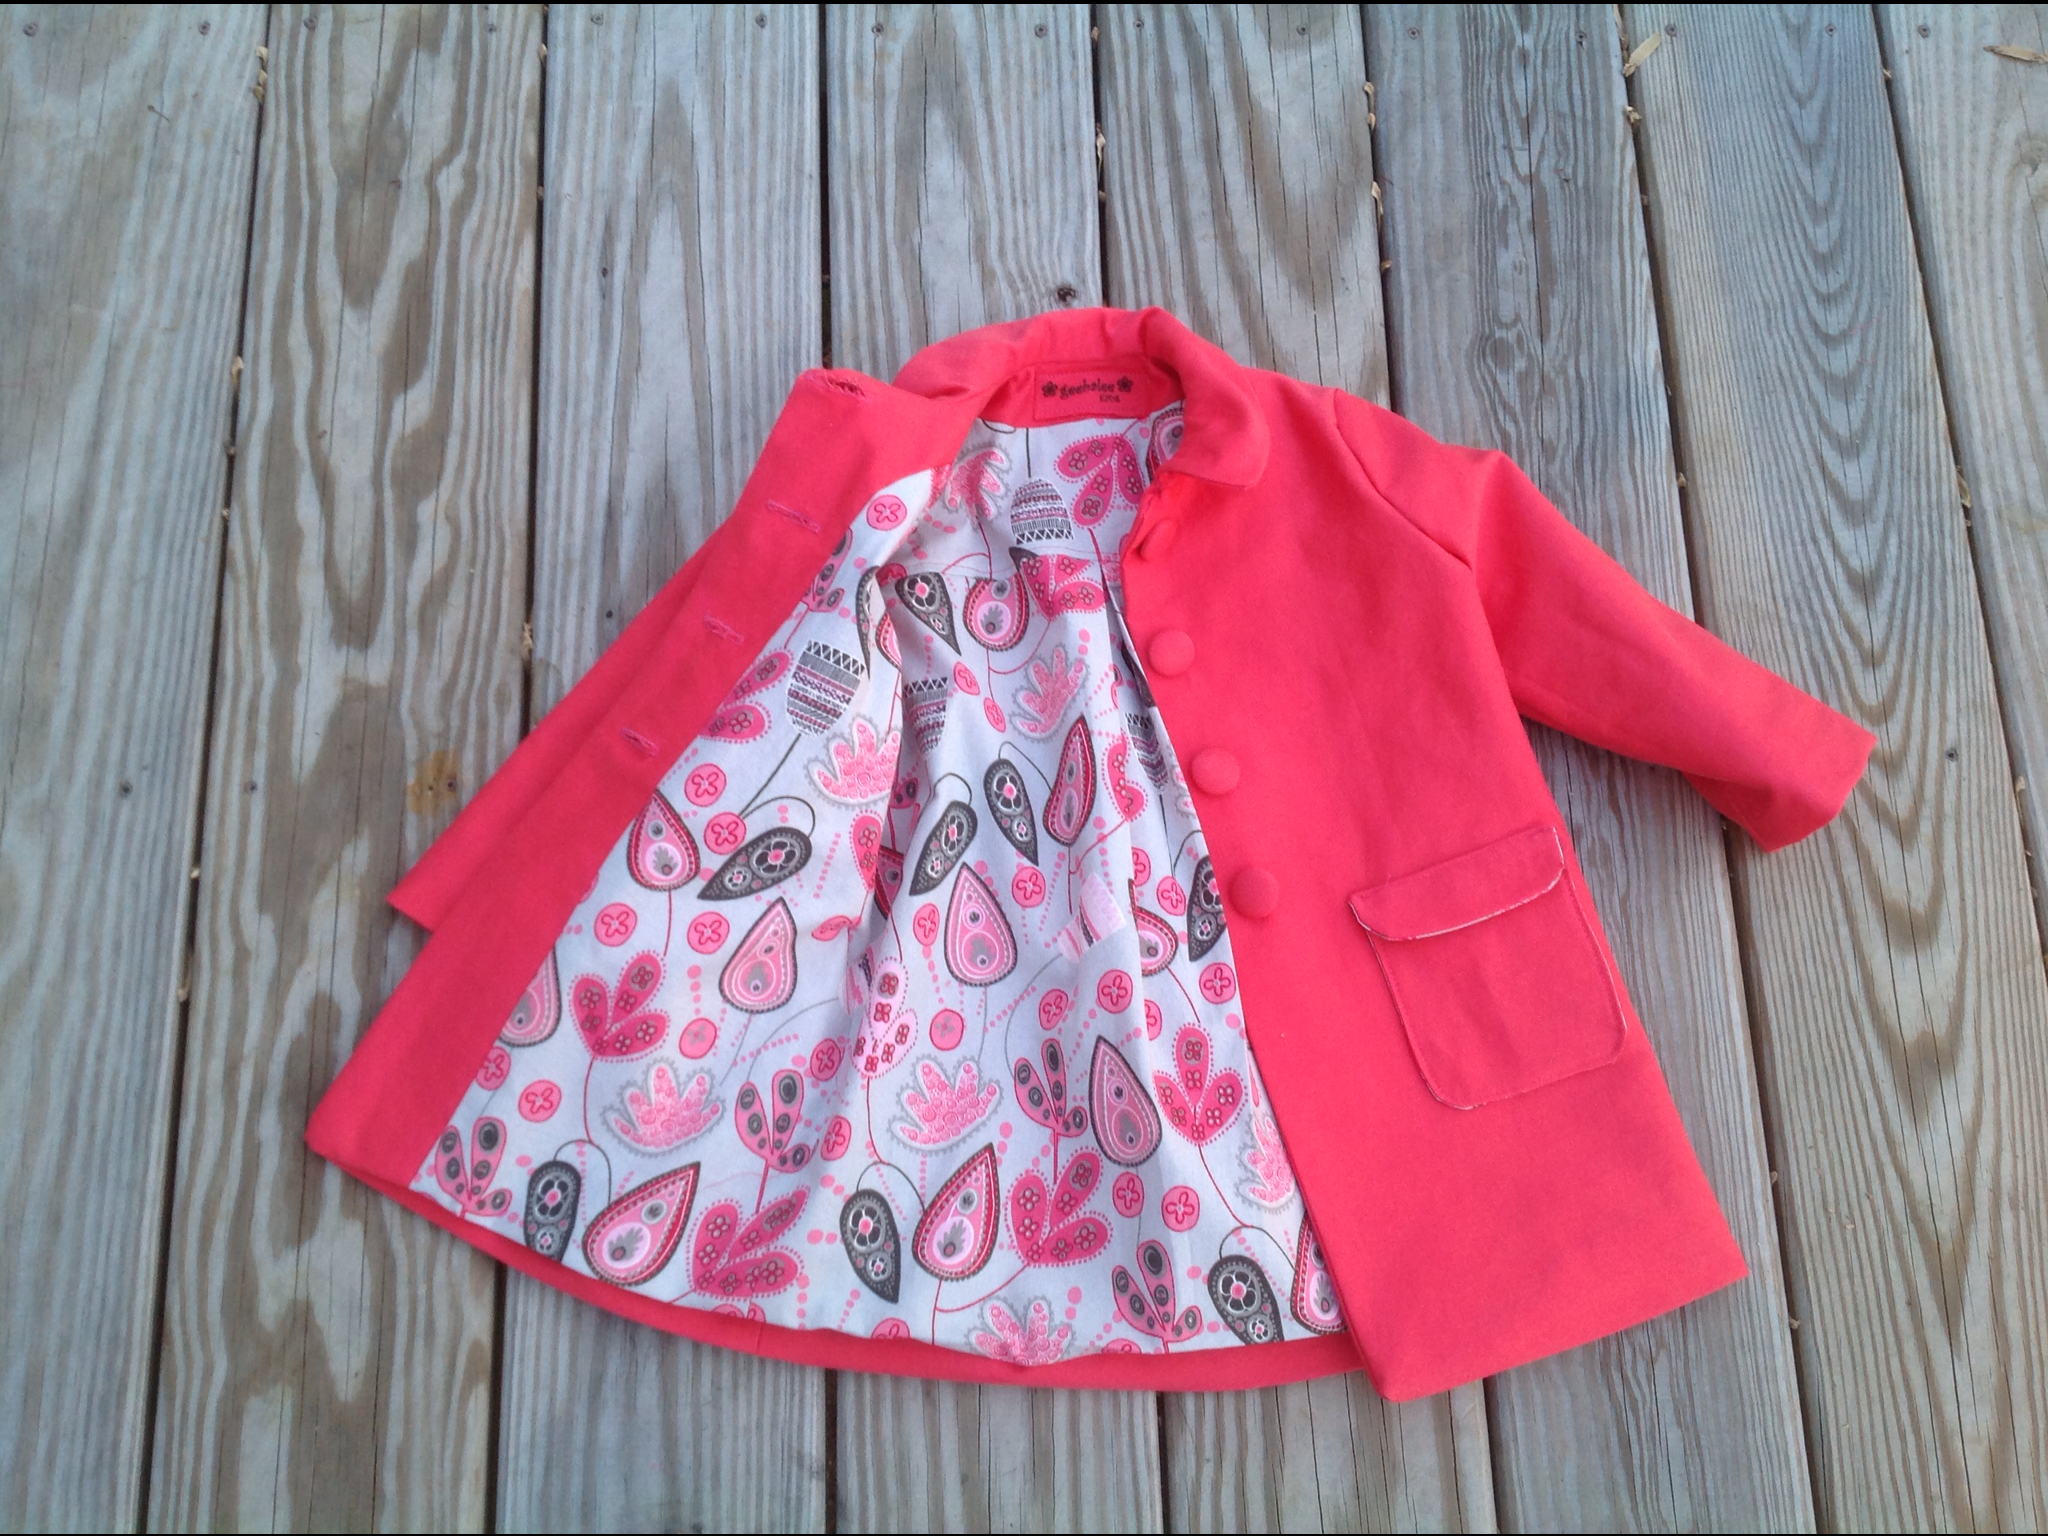 Little Girls Spring Coat – Sewing Projects | BurdaStyle.com